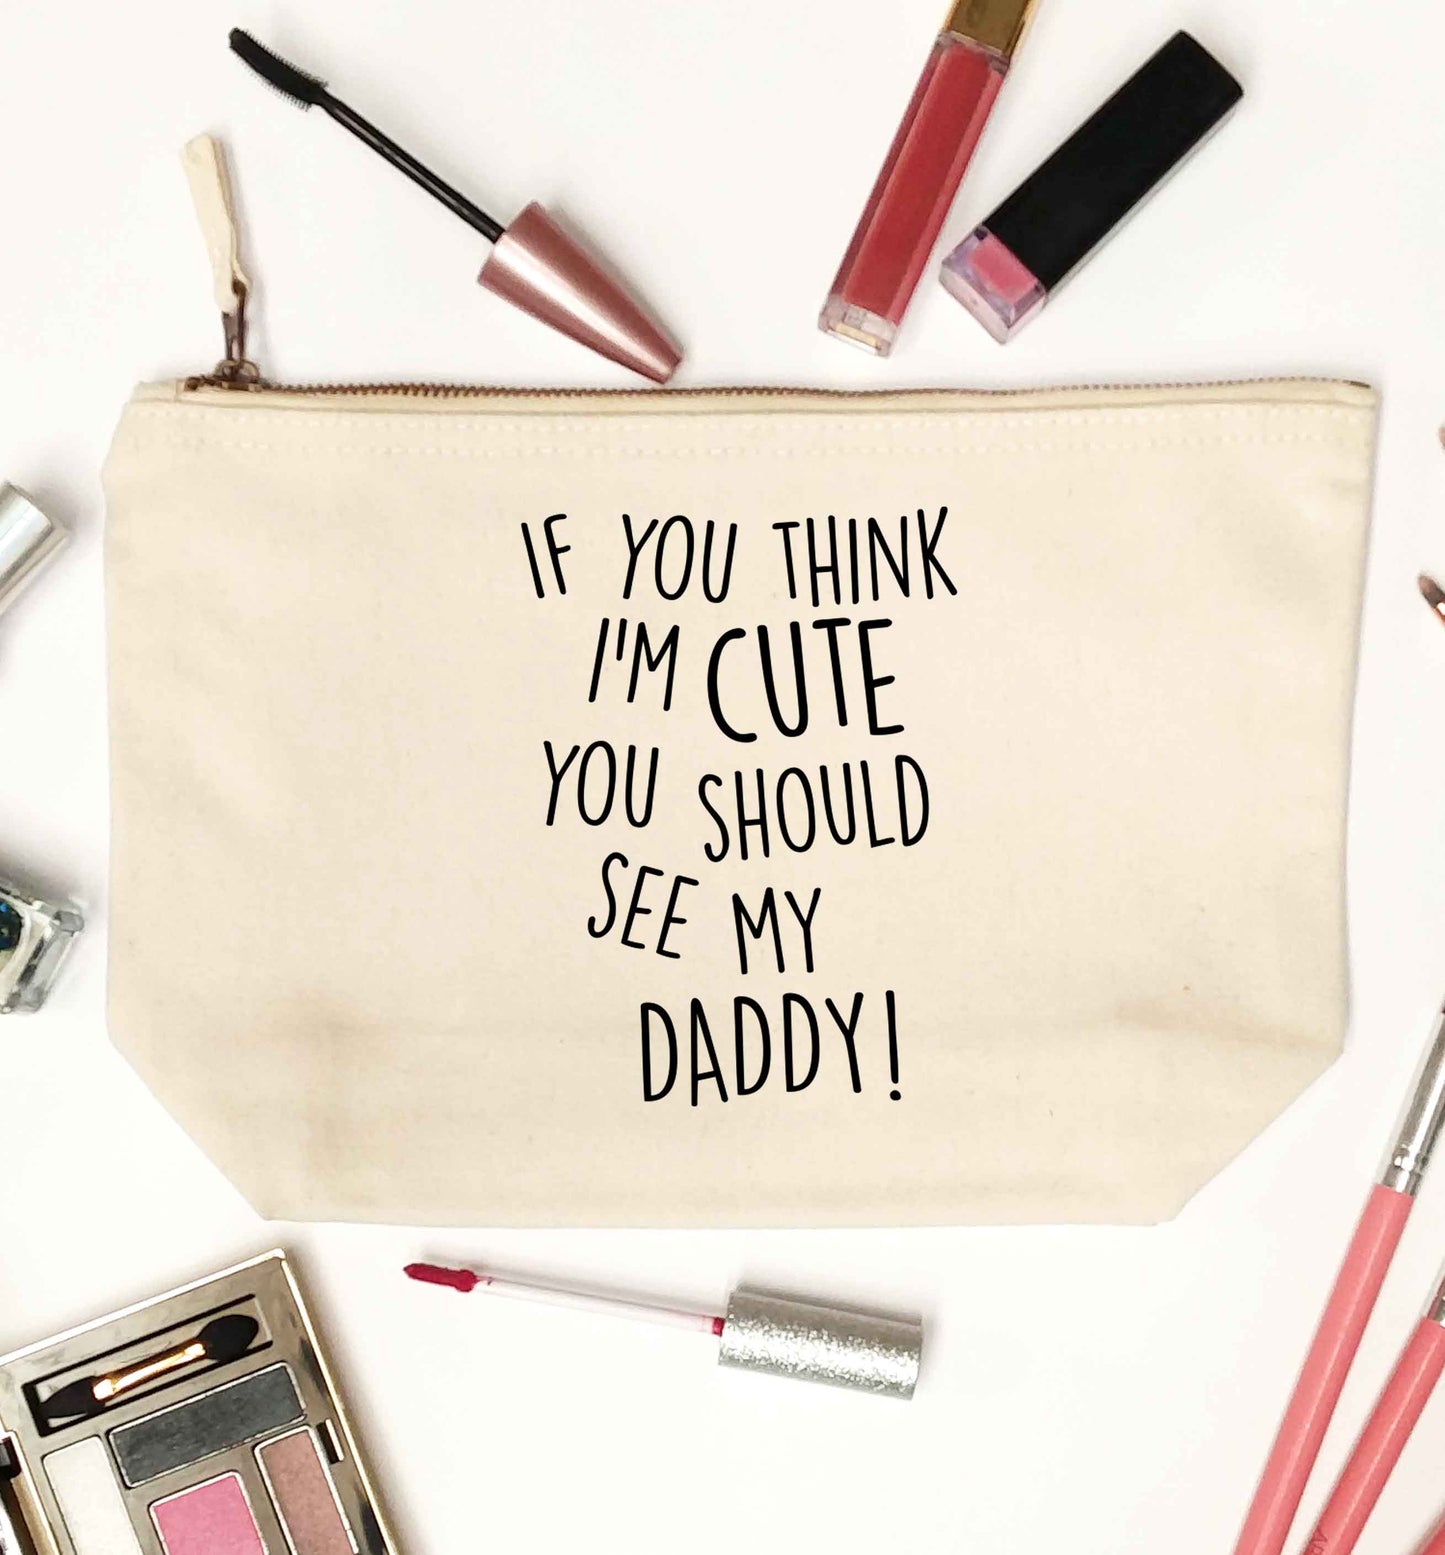 If you think I'm cute you should see my daddy natural makeup bag